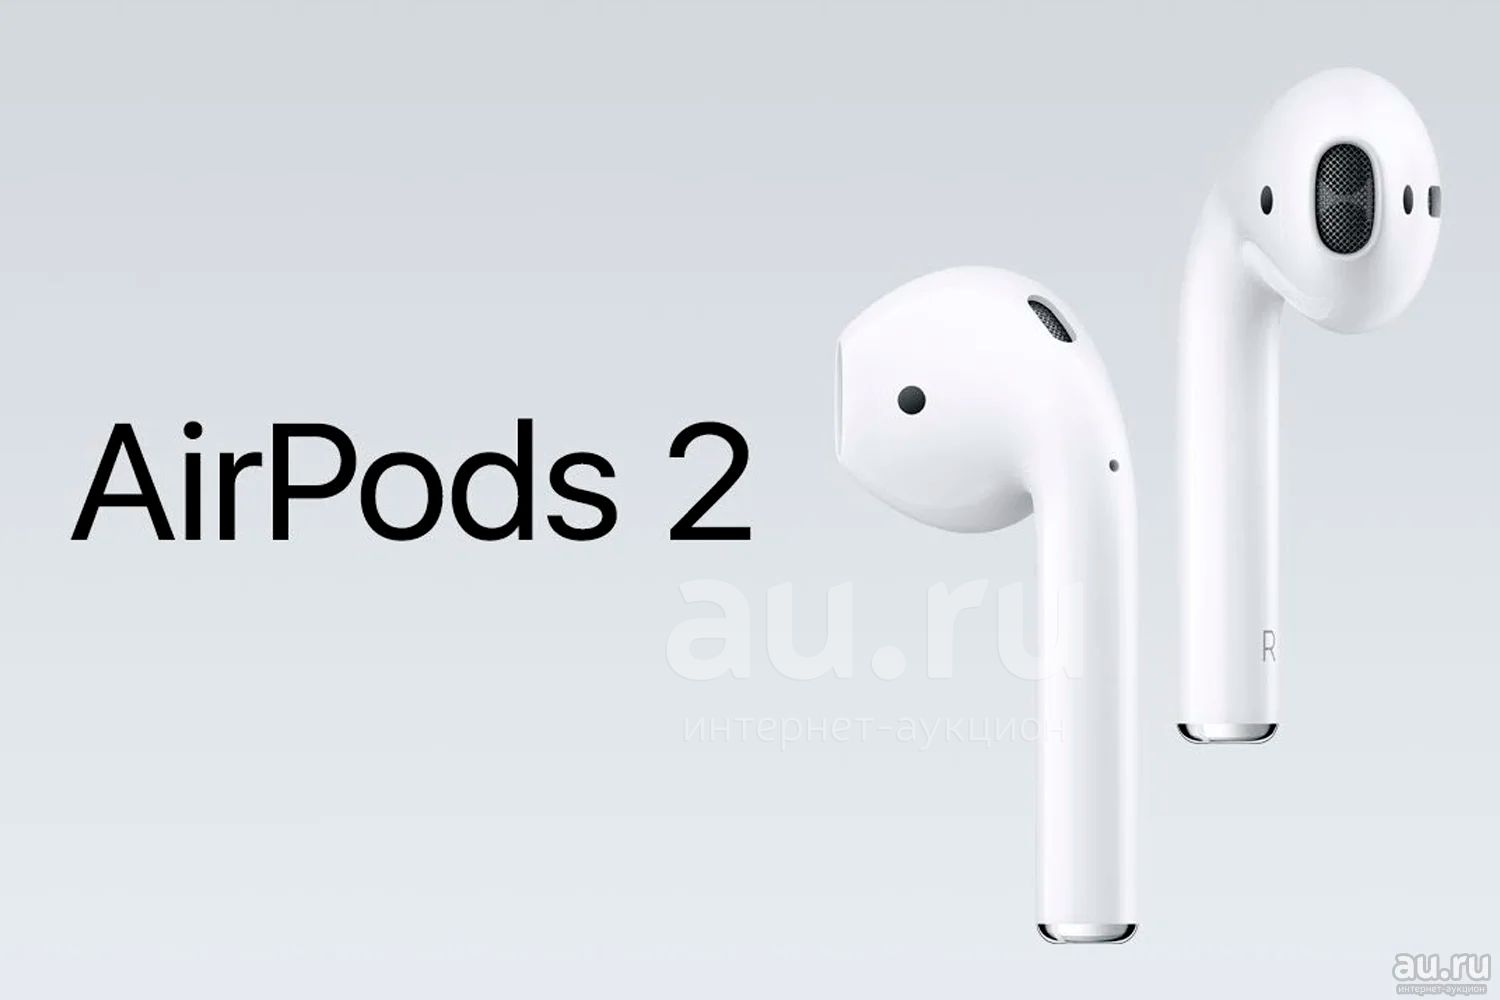 Airpods 2 чип. Apple AIRPODS 2. Наушники беспроводные Apple AIRPODS 2. Наушники TWS Apple AIRPODS Pro 2 белый. Apple AIRPODS 3 'Т.